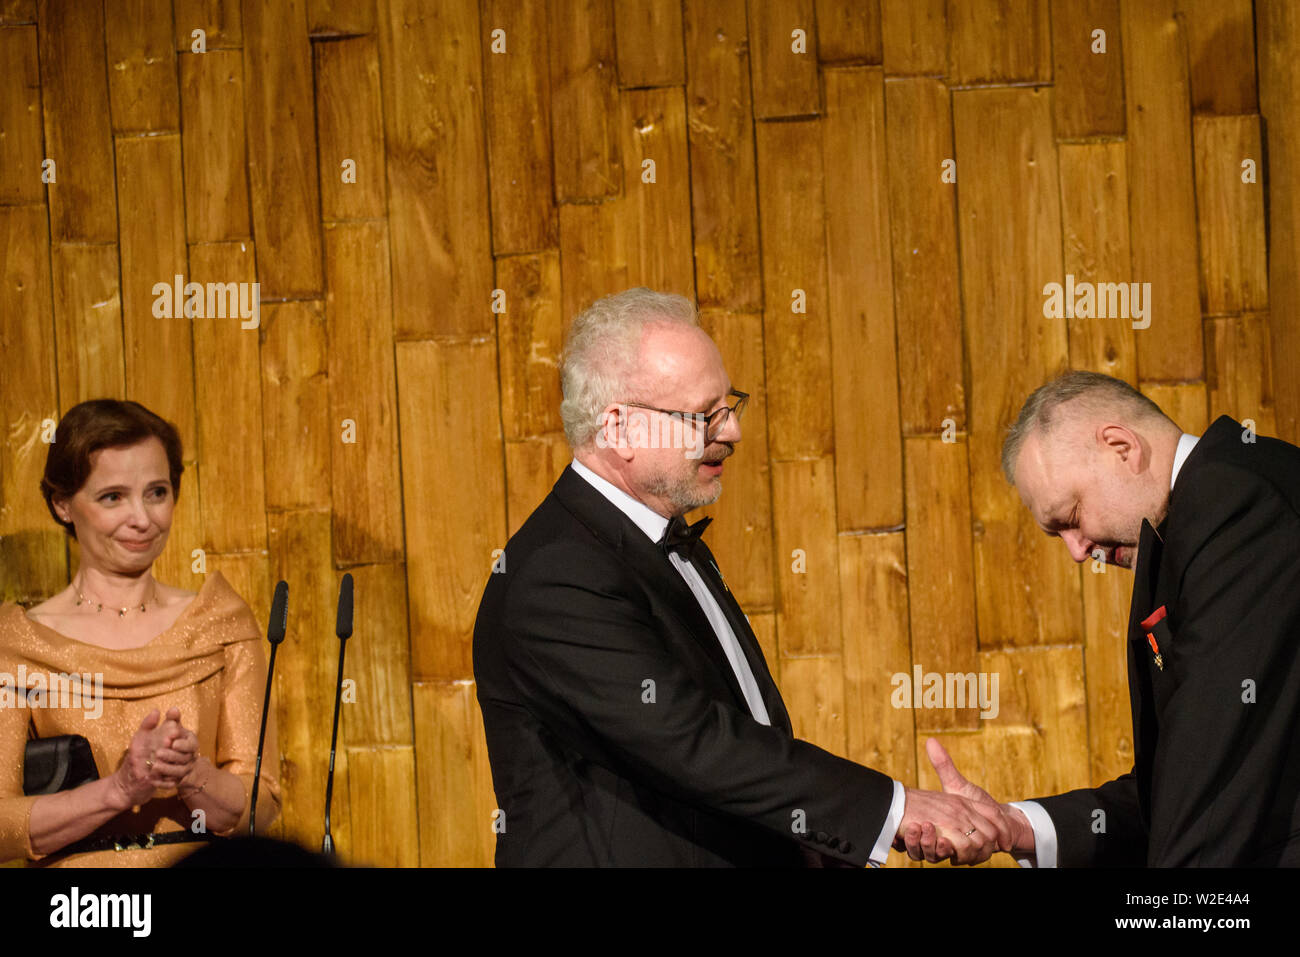 Riga, Latvia. 8th July 2019. Egils Levits giving gift for Andris Vilks, director of LNB (Latvian National Library), during Reception in honour of the inauguration of President of Latvia Mr Egils Levits accompanied by First Lady of Latvia Mrs Andra Levite. Credit: Gints Ivuskans/Alamy Live News Stock Photo